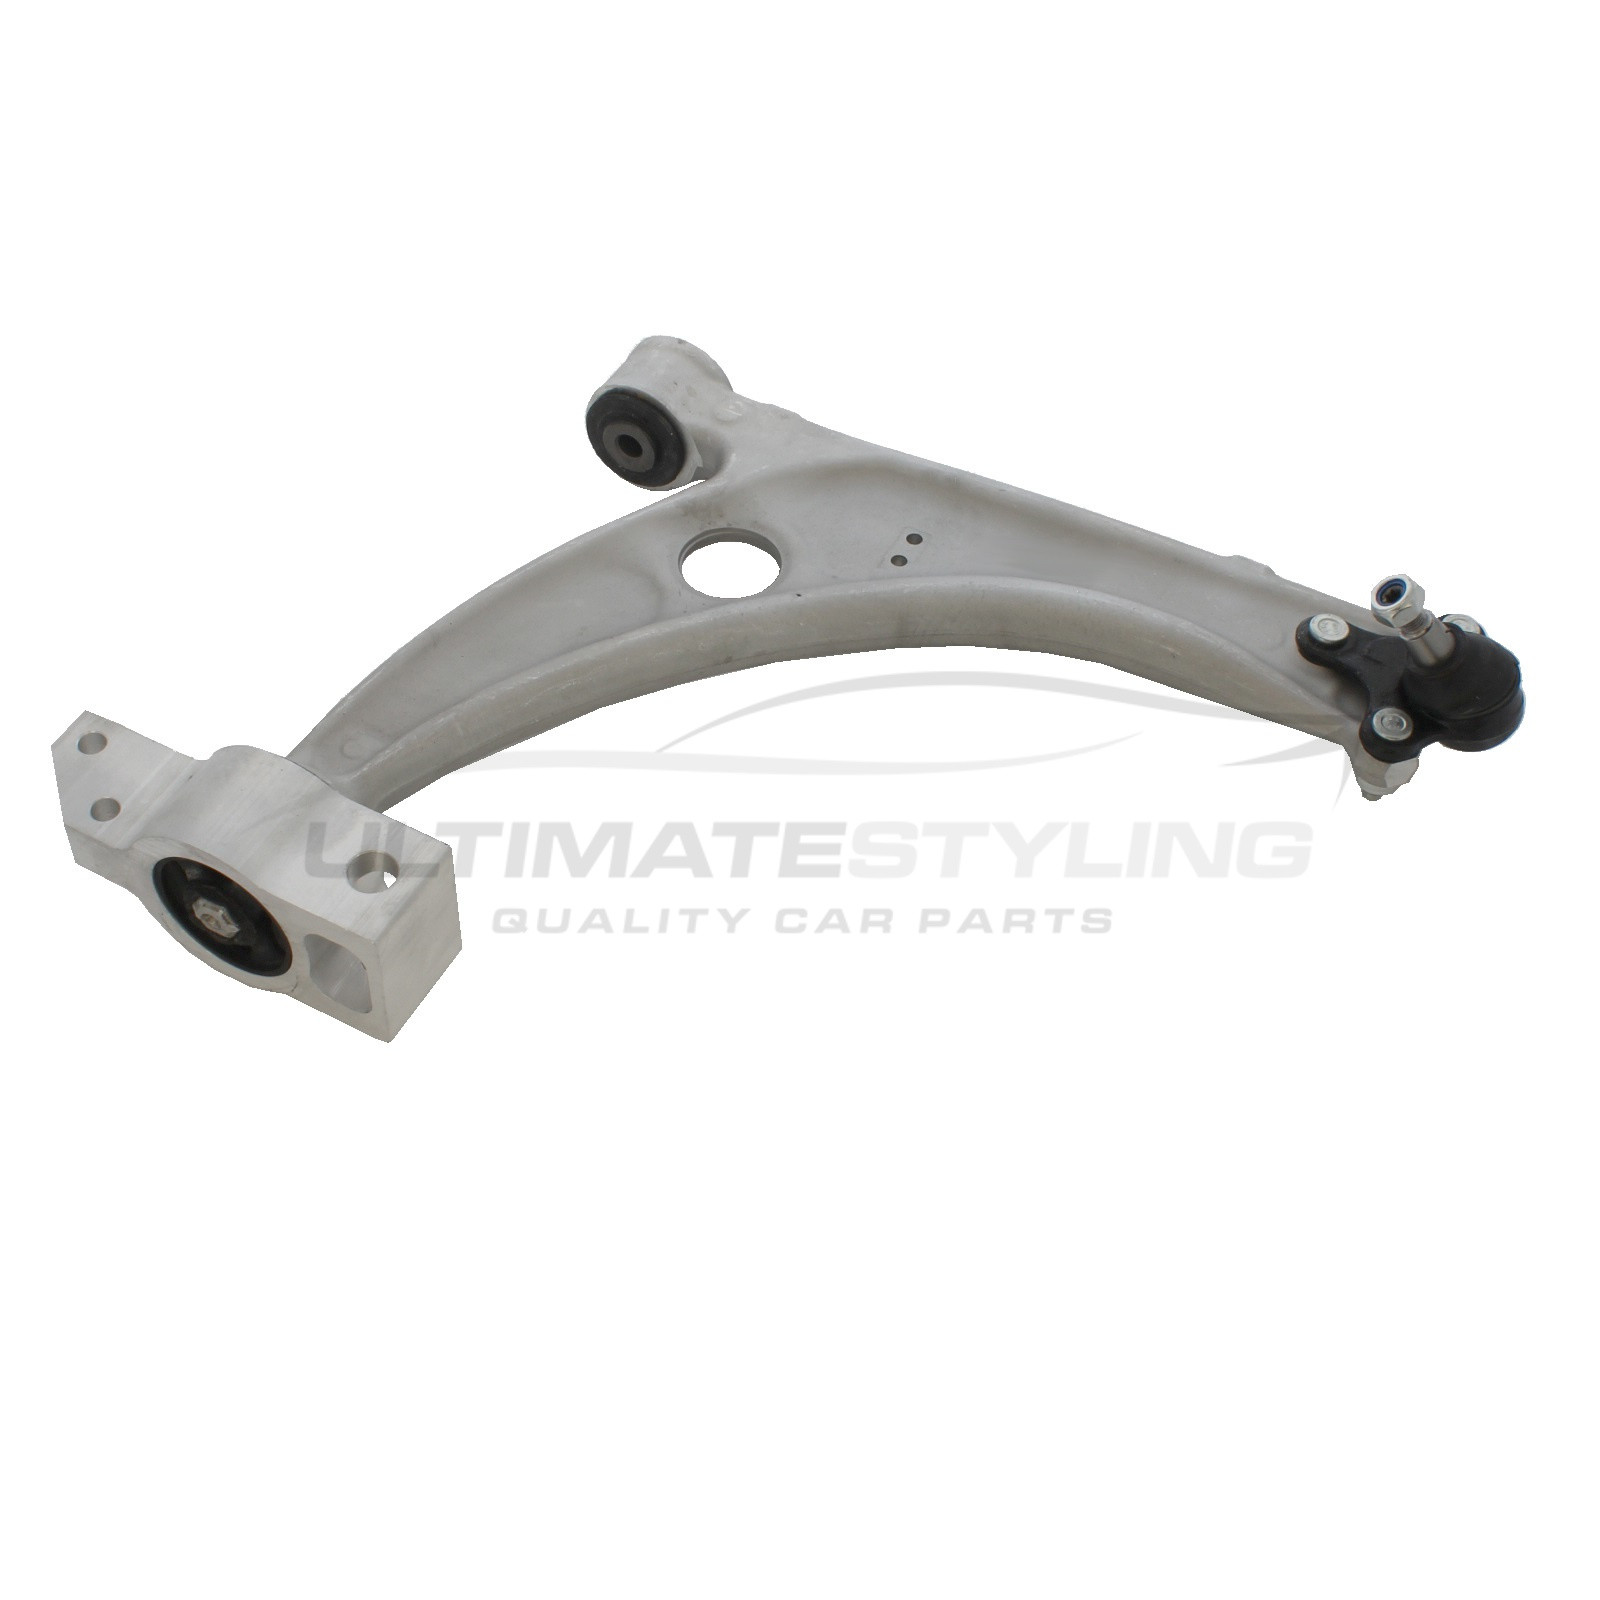 Suspension Arm - Front Lower (RH) for Audi Q3, Seat Alhambra, Volkswagen CC  / Passat and others